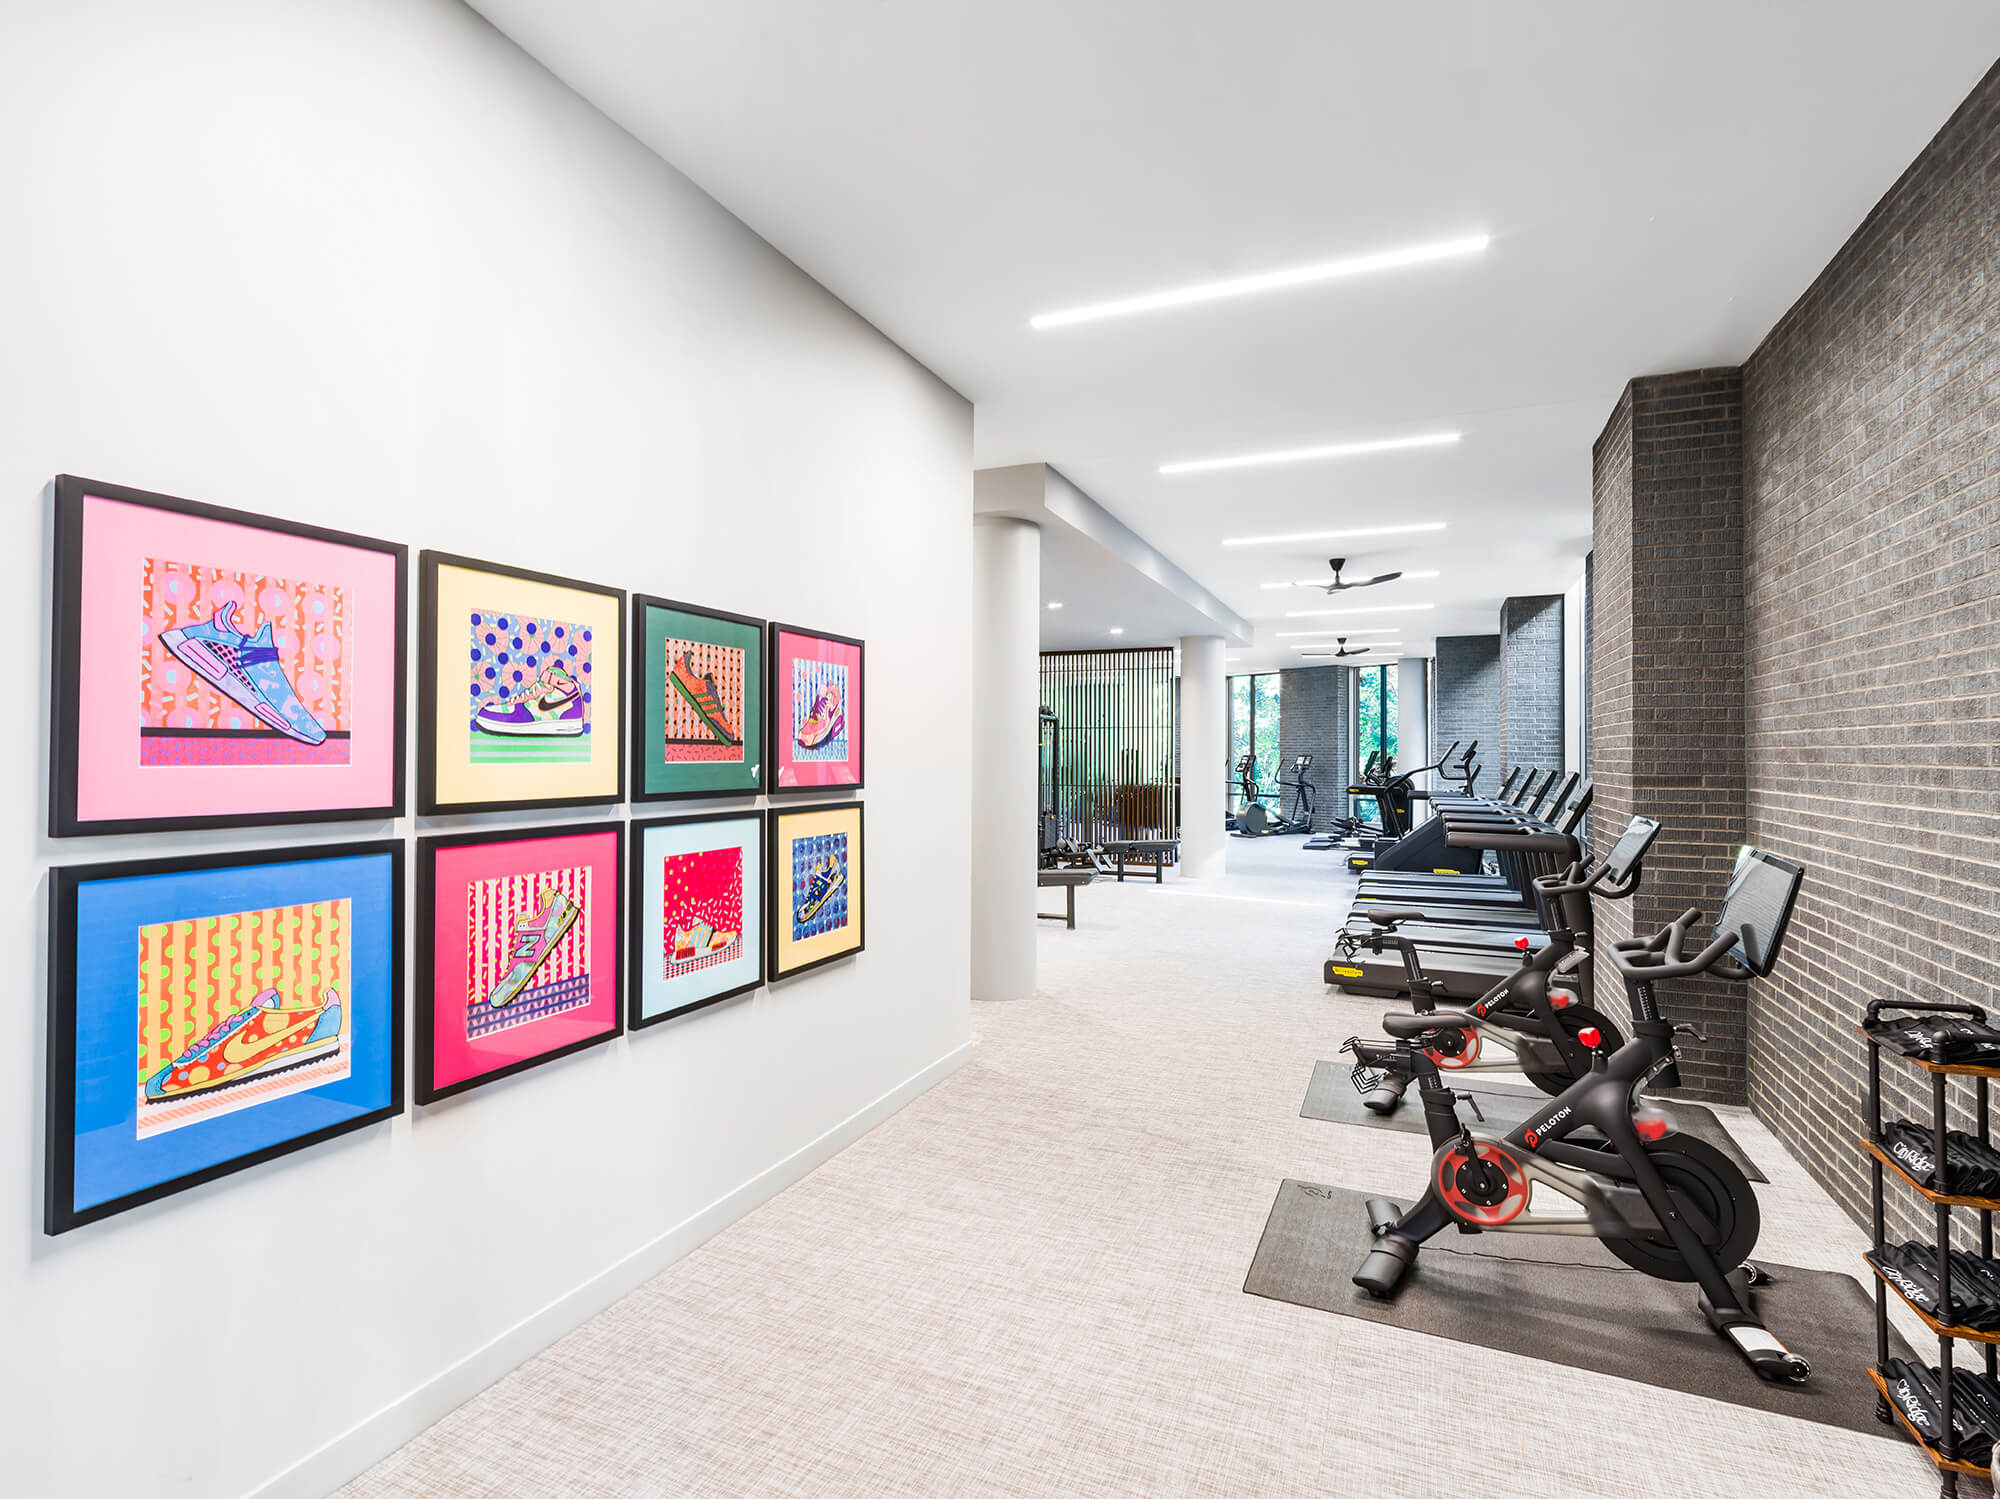 Well-being comes easy here with Peloton